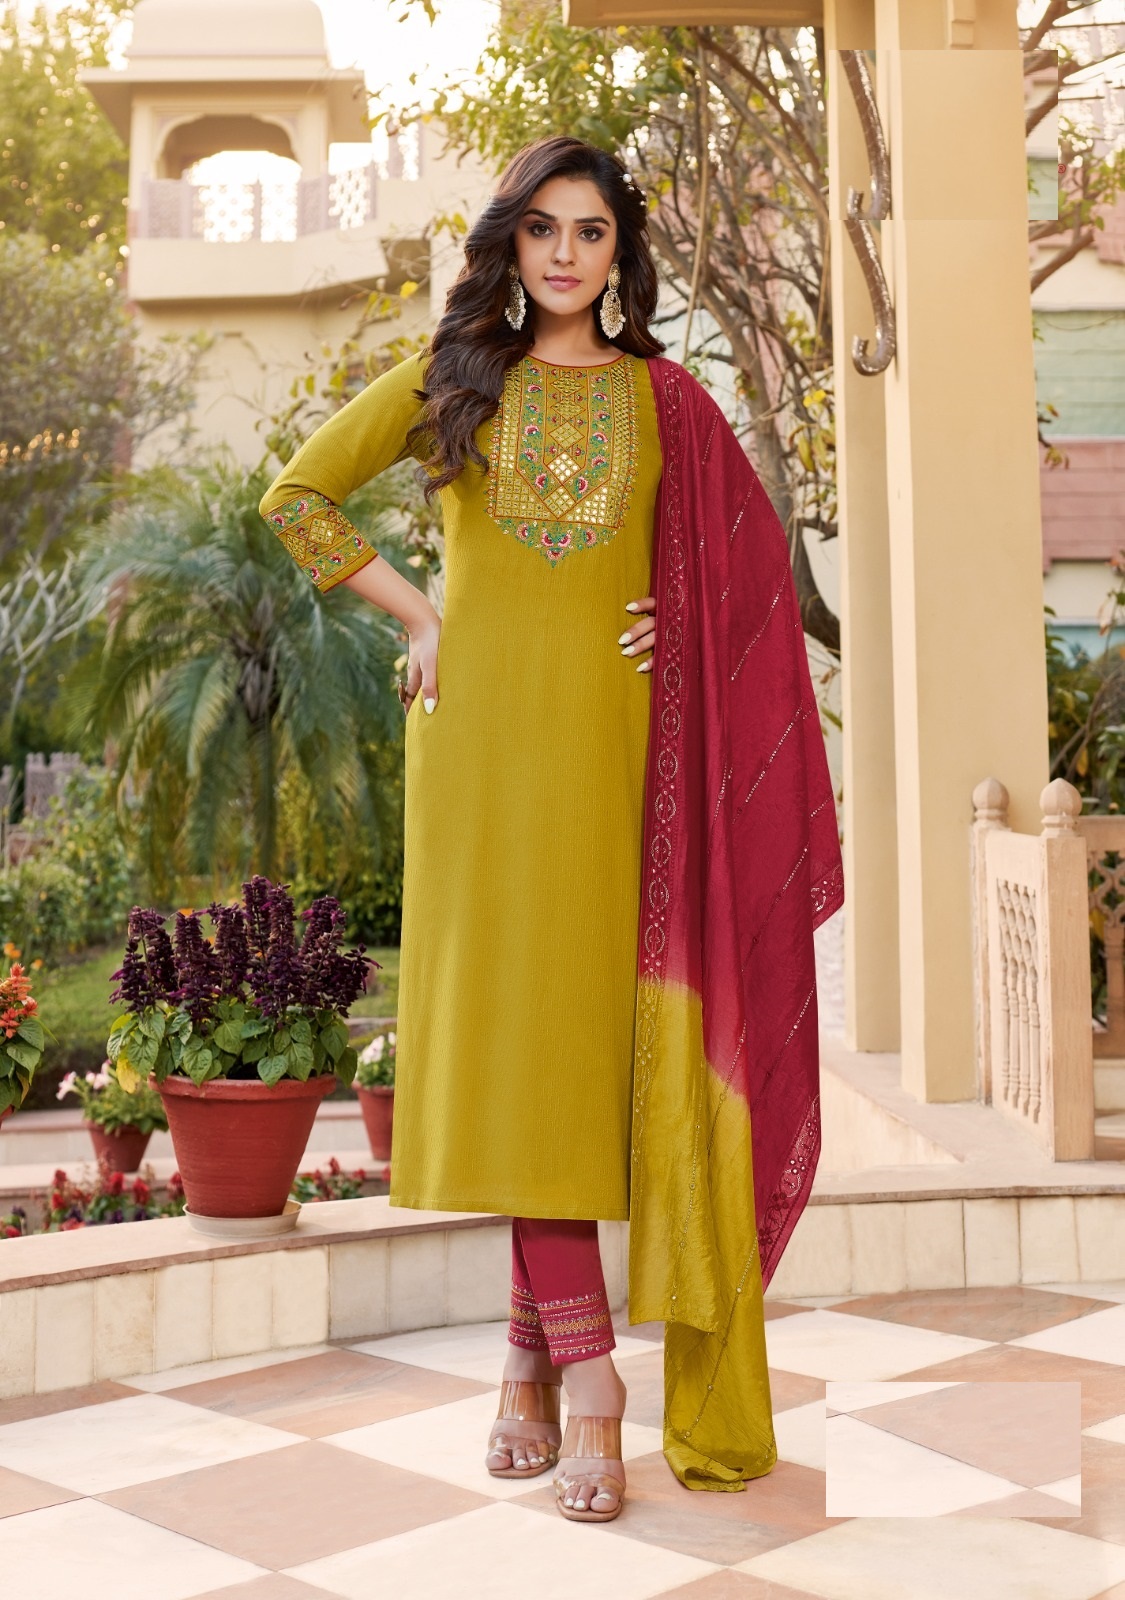 Pure Rayon Weaving With Heavy Embroidery Mirror work and Pure Chandelier Dupatta Kurtis set for women